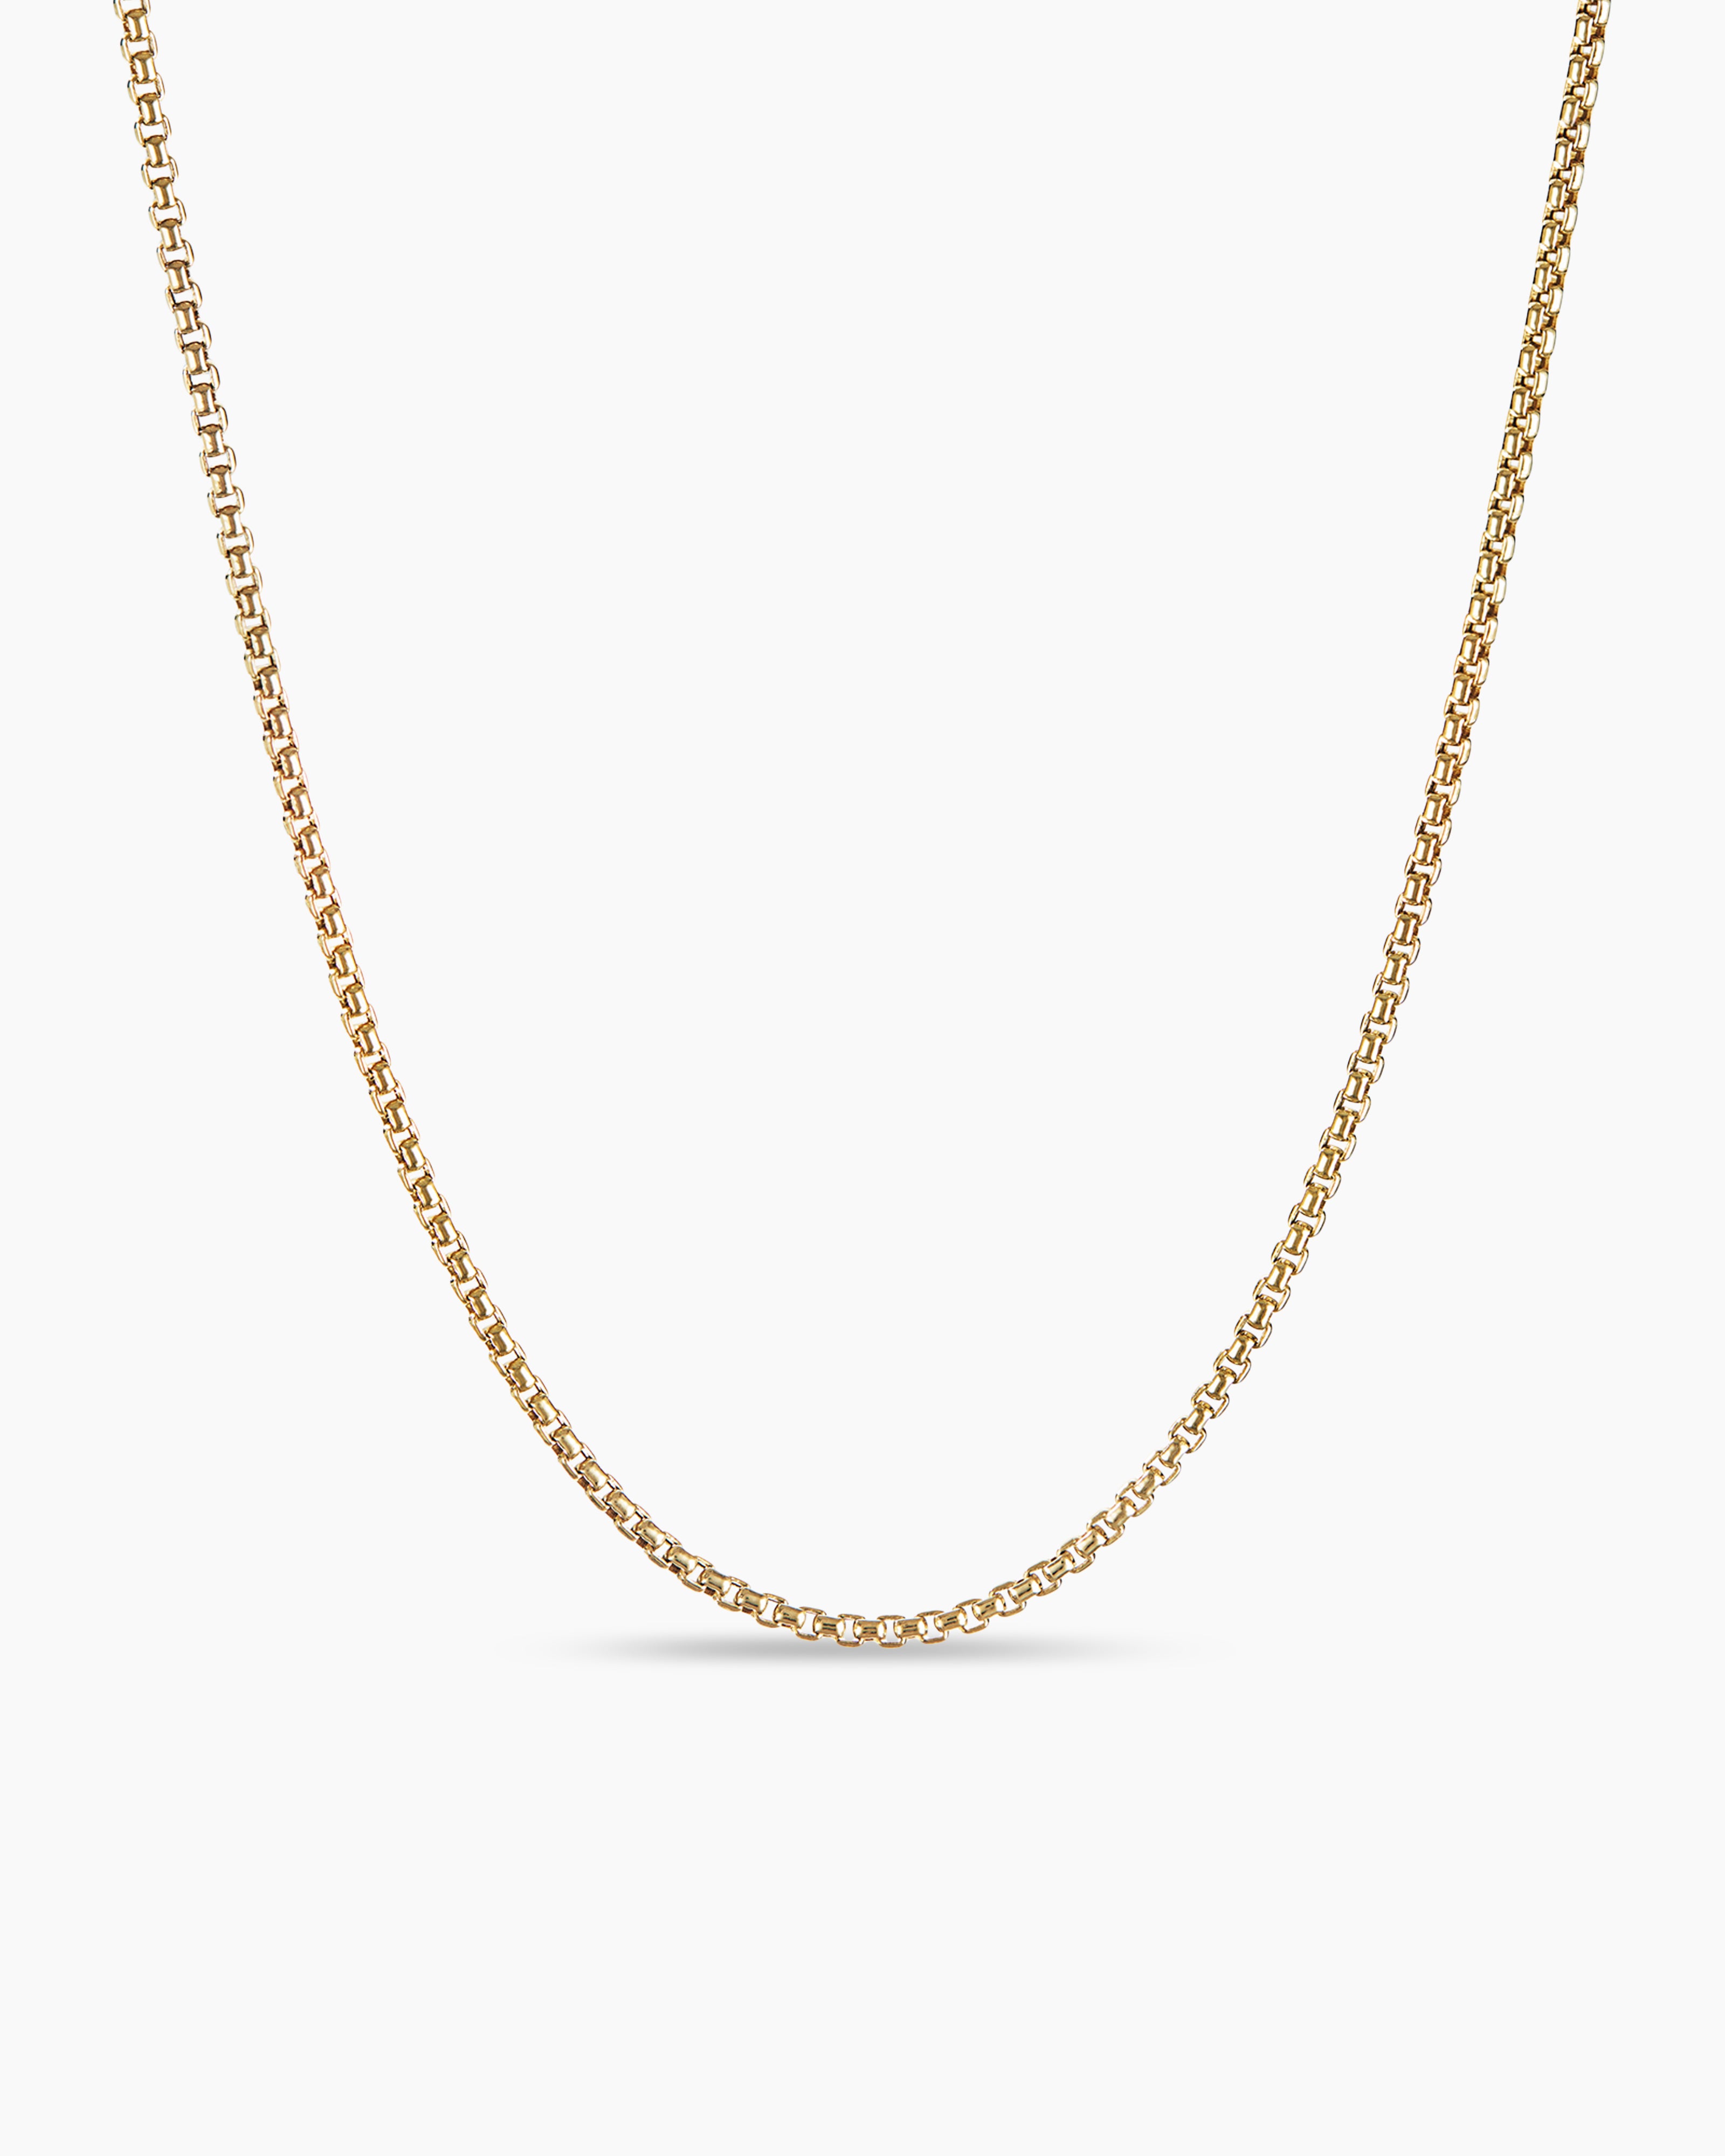 Bright Gold Plated 5mm Chain Necklace Extender w/ Drop 2 inch (5)